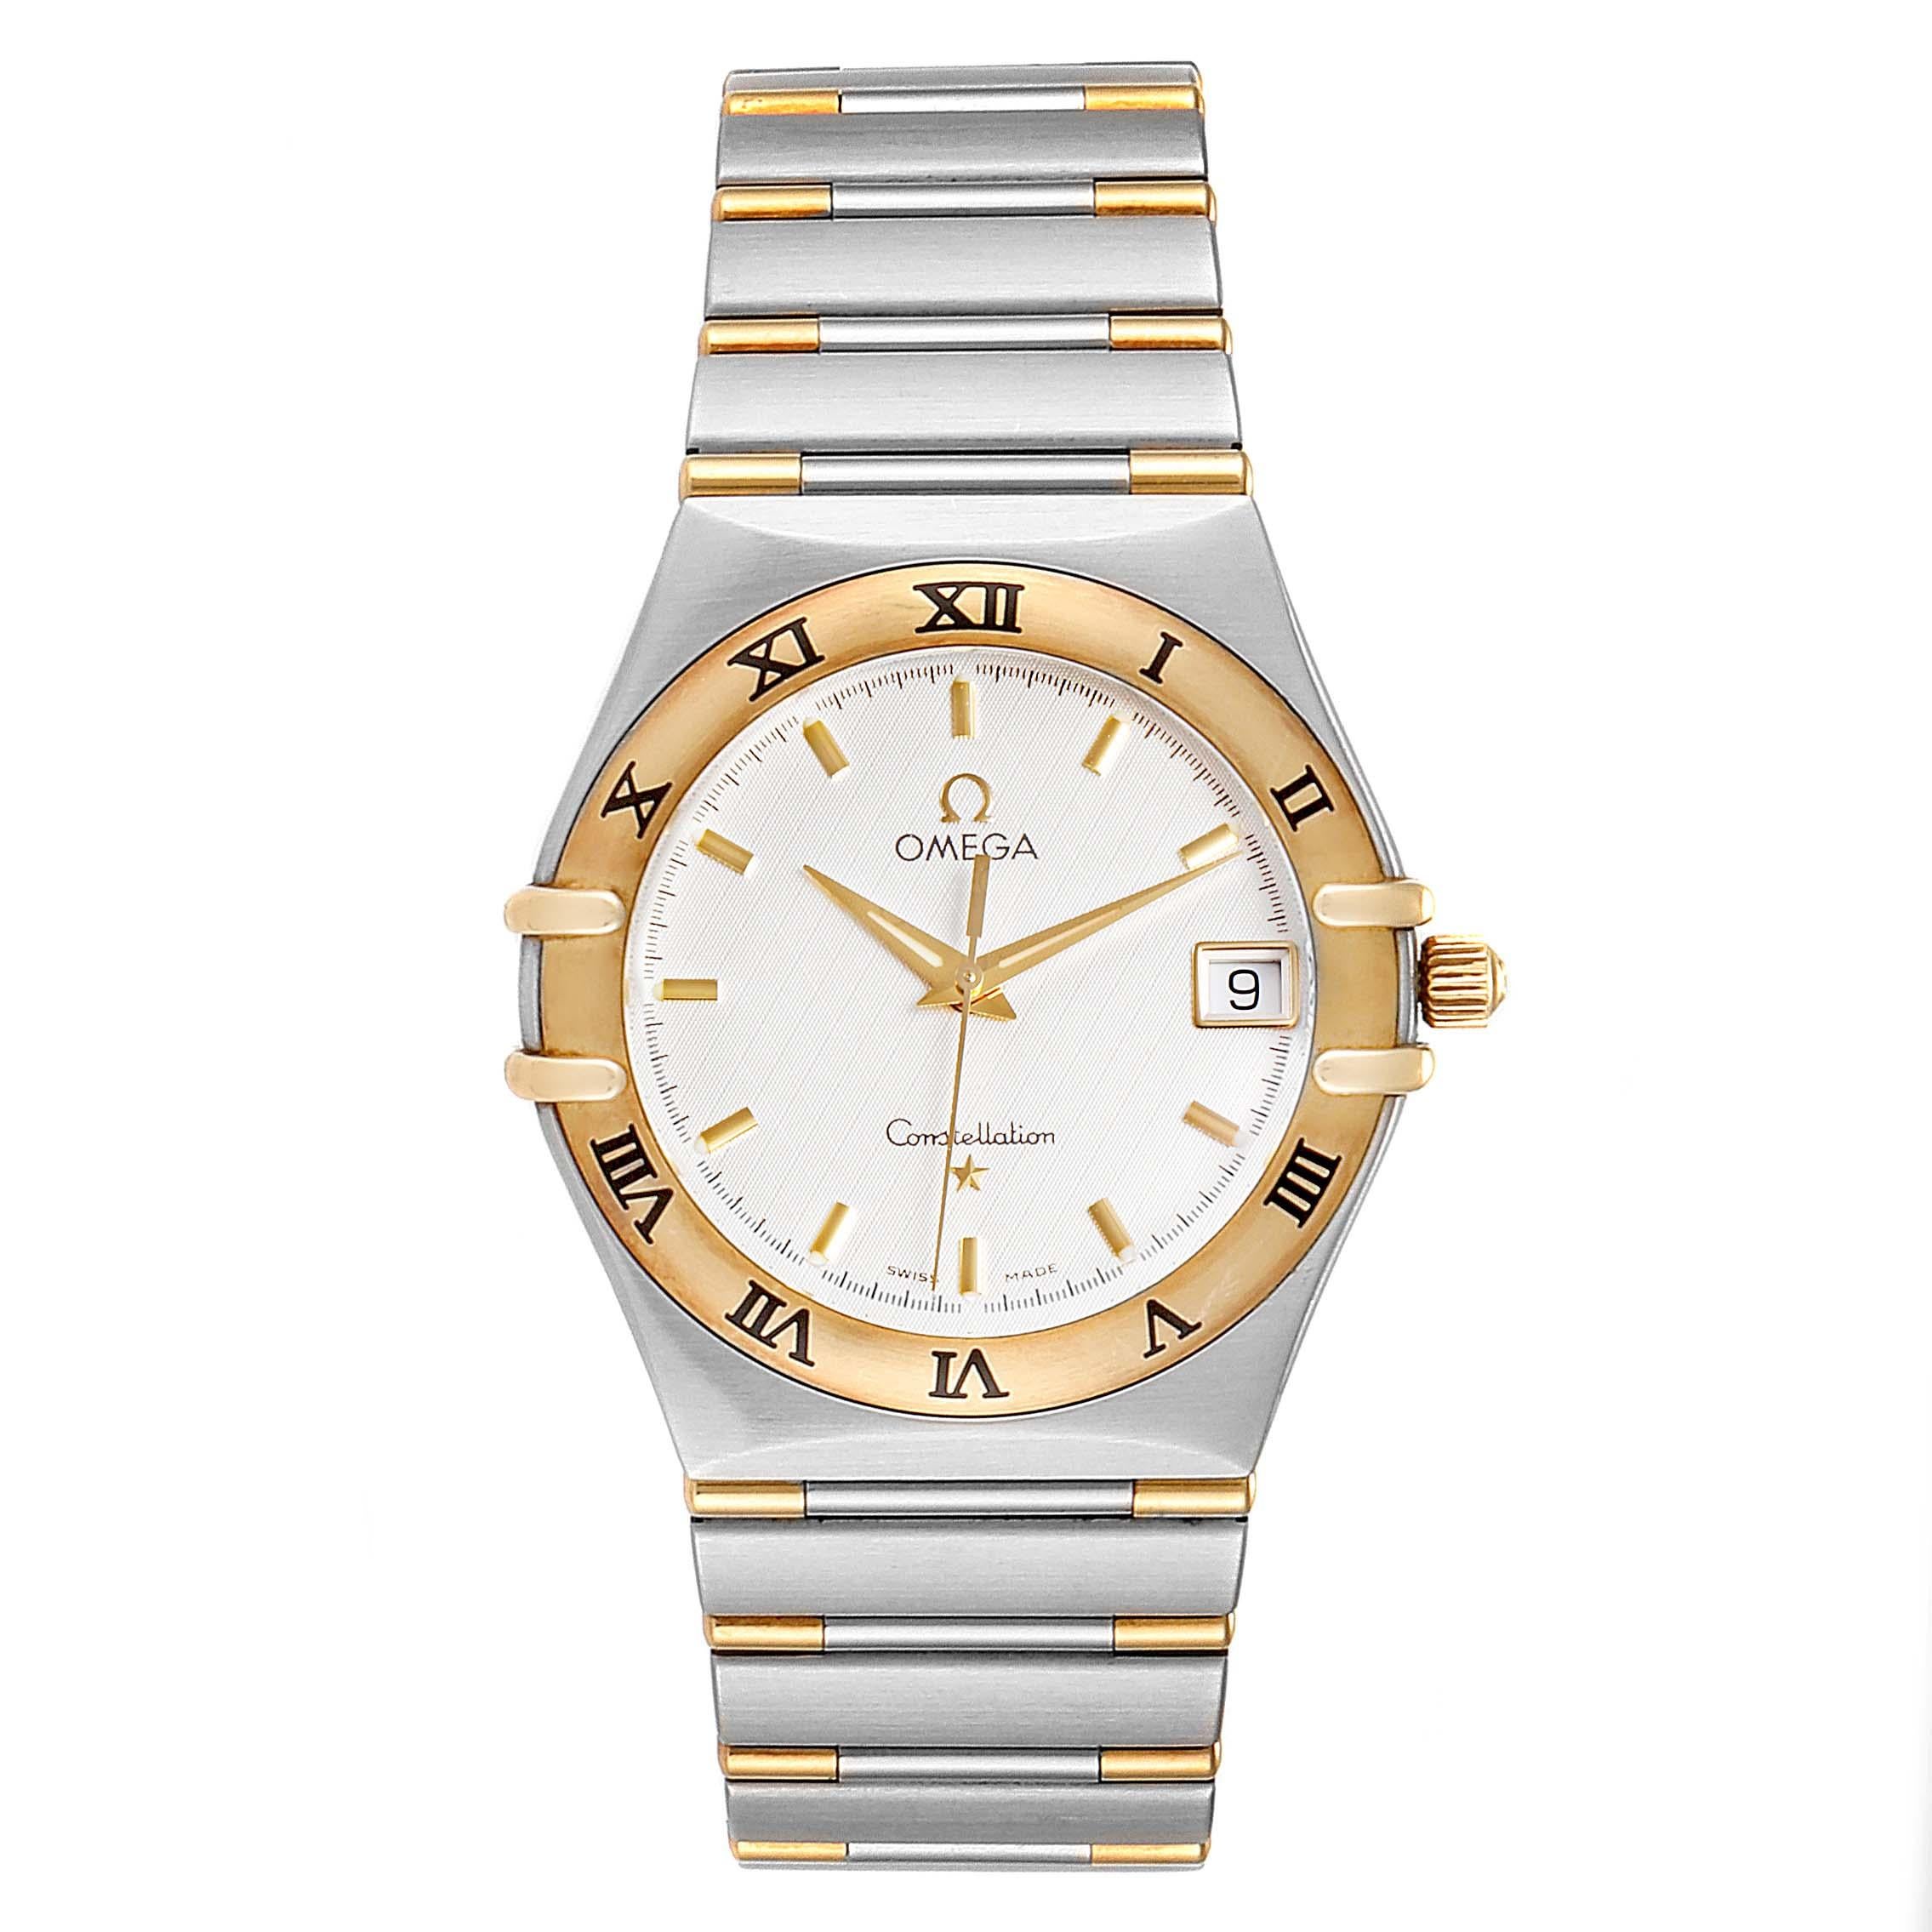 Omega Constellation Steel 18K Yellow Gold Mens Watch 1312.30.00 Card. Quartz movement. Brushed stainless steel and 18K yellow gold case 33.5 mm in diameter. Omega logo on a crown. 18K yellow gold fixed bezel. Scratch resistant anti-reflective